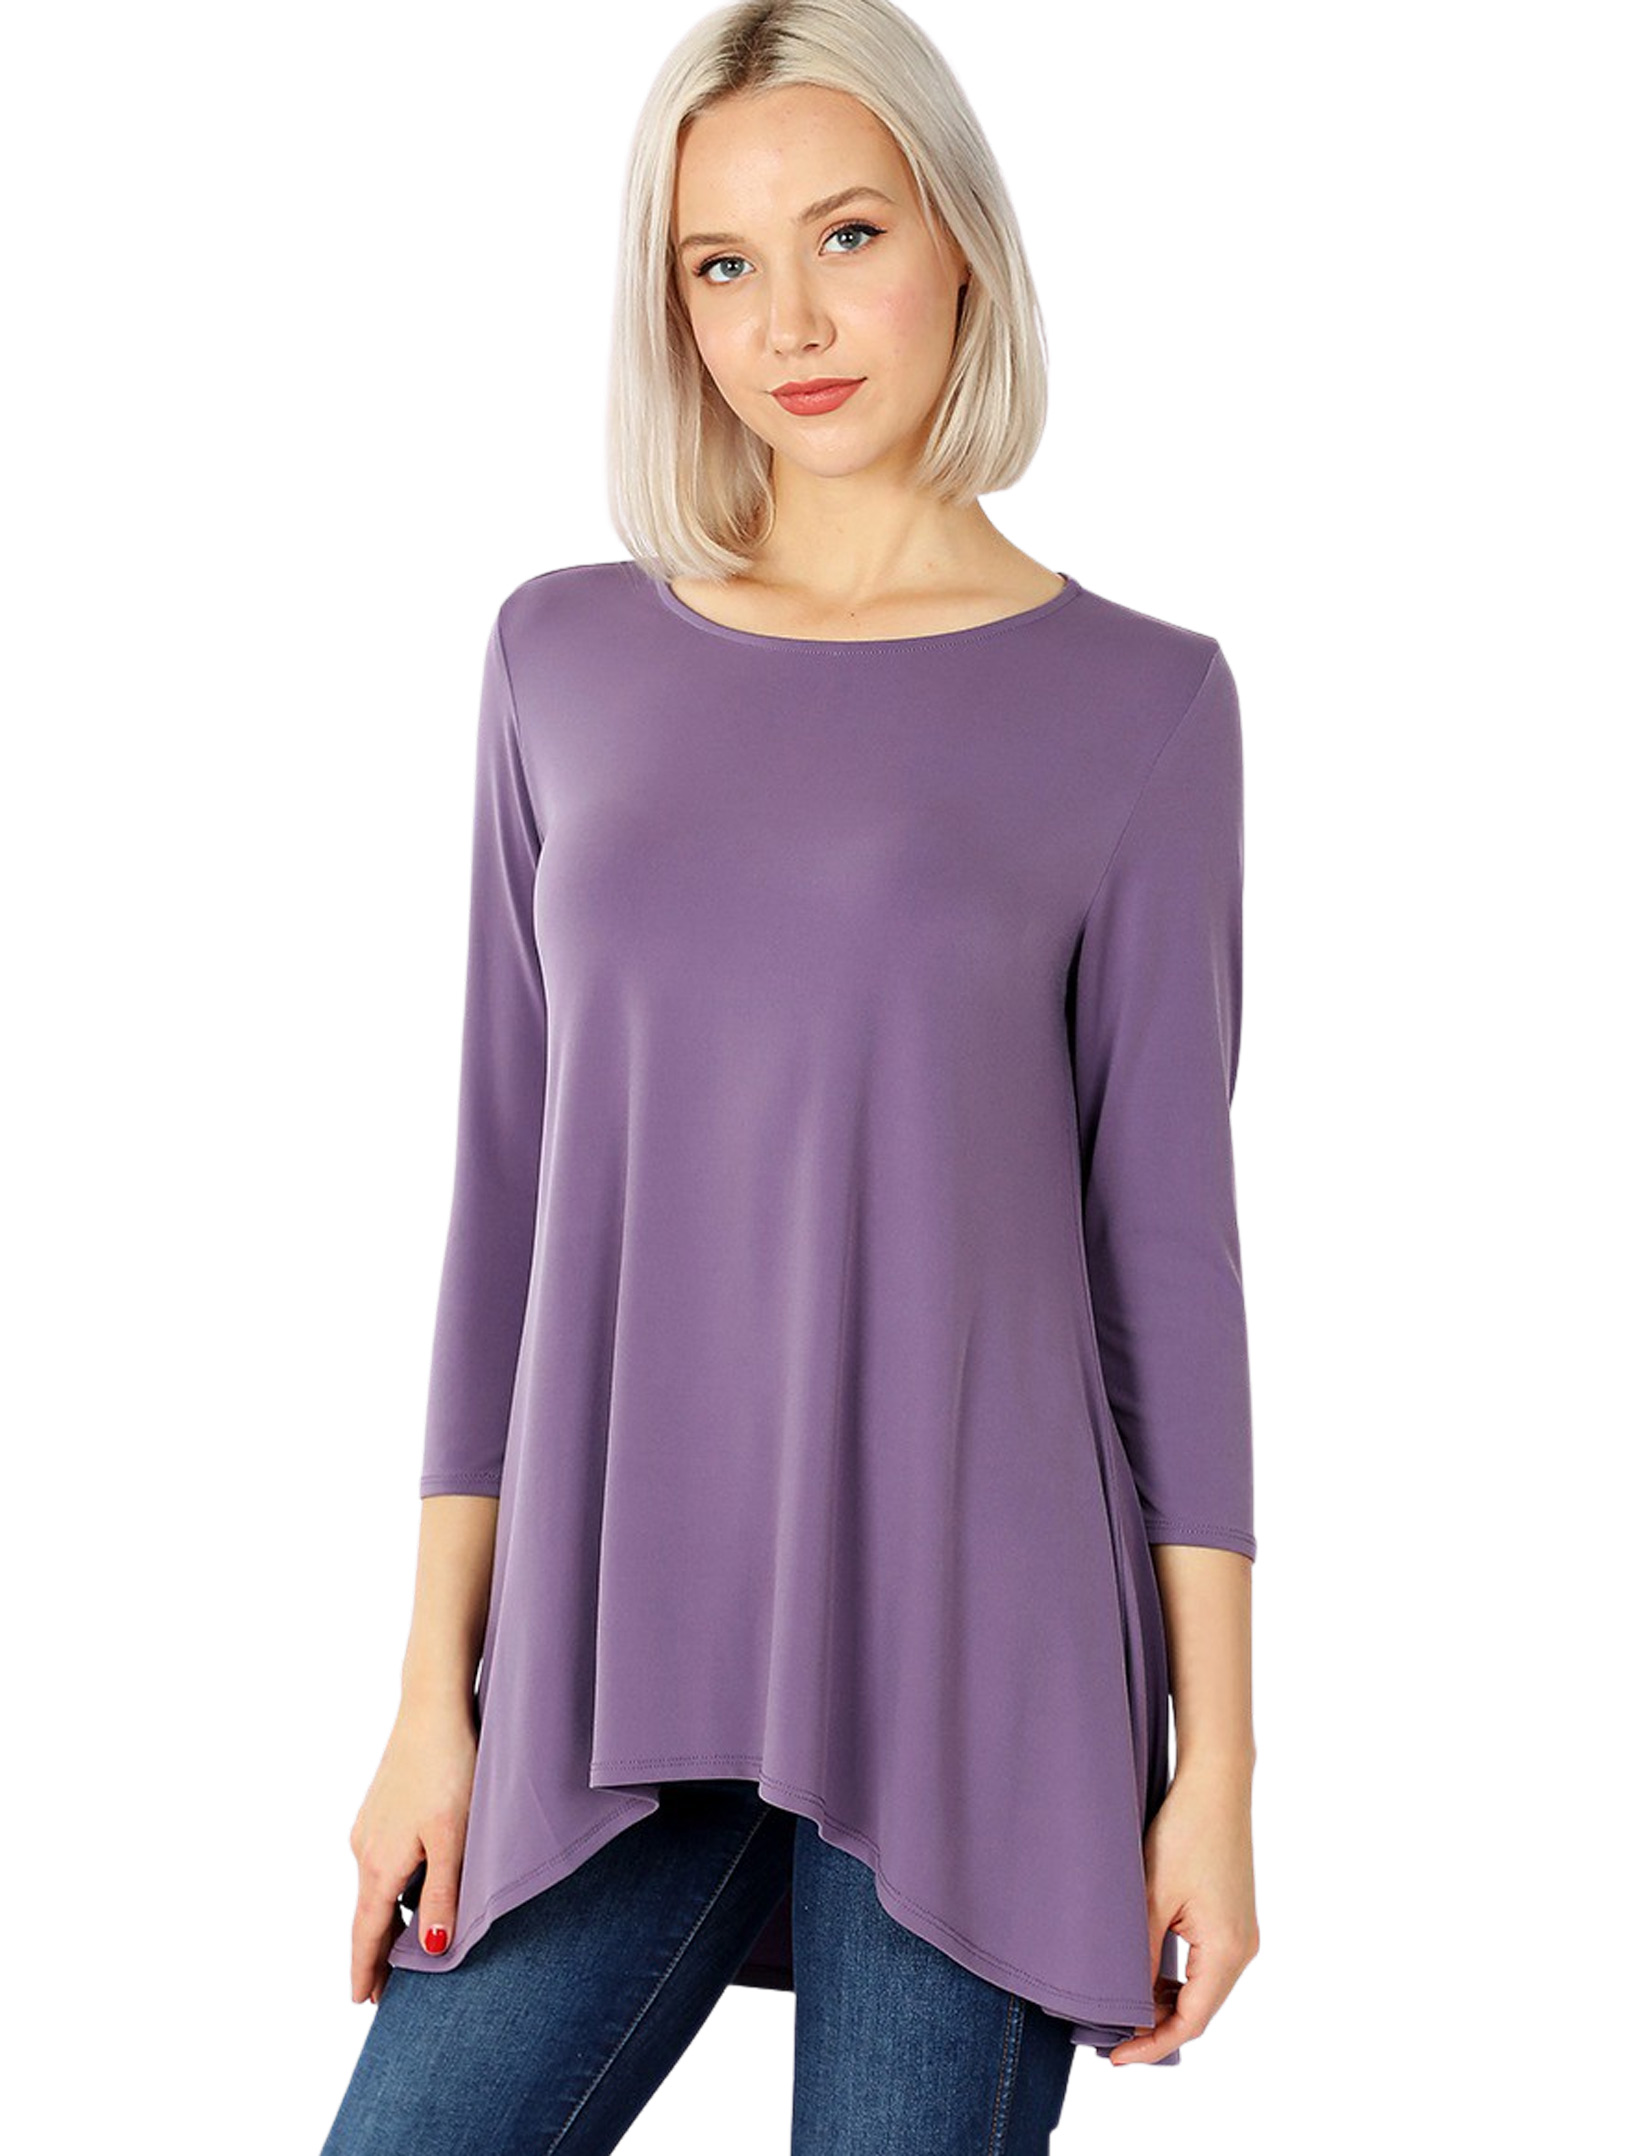 wholesale 2367 - Ity High-Low 3/4 Sleeve Top